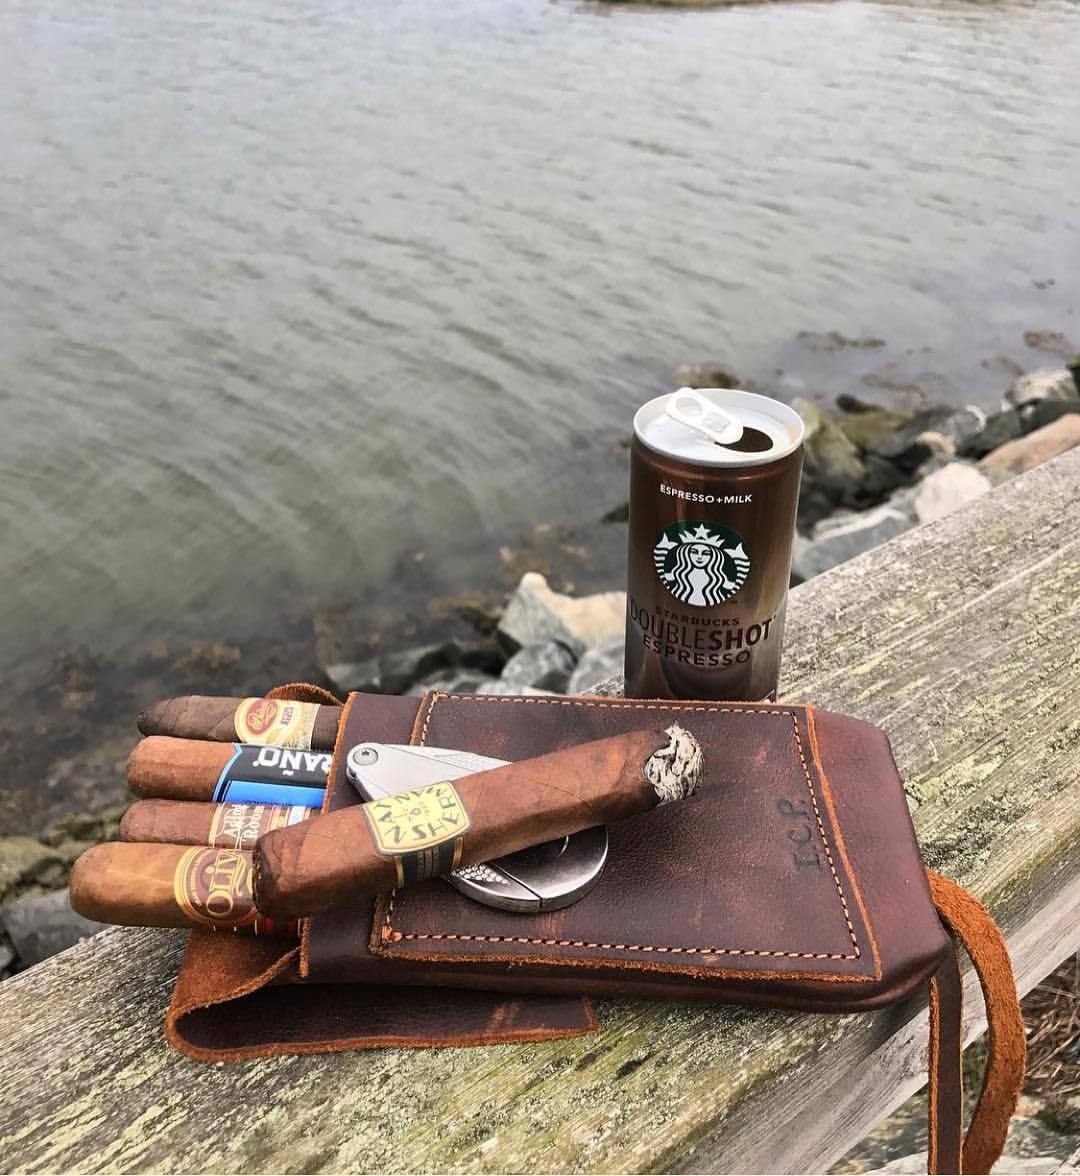 Great pic of a Legendary Saxon premium leather cigar case! 🔥💨 Repost from @ingvarscigarpage So how is your Tuesday so far? I’m starting mine with a beautiful #natsherman a gift from @dukeofcigars and a #doubleshot #espresso 😀☕️☕️